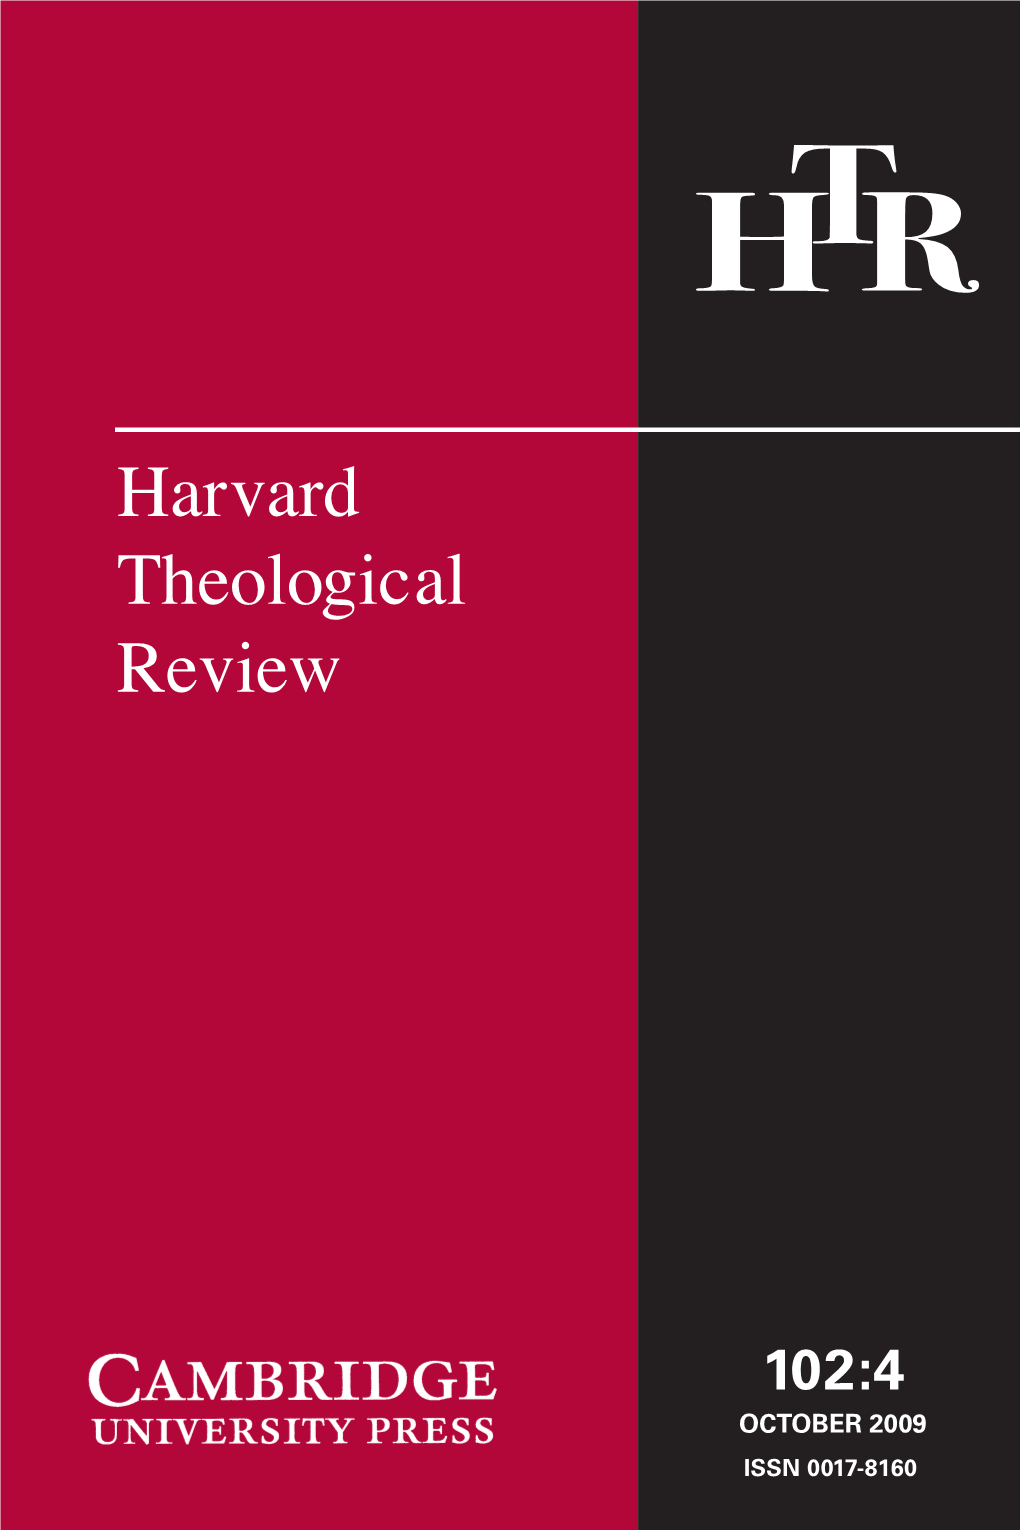 HTR Volume 102 Issue 4 Cover and Front Matter